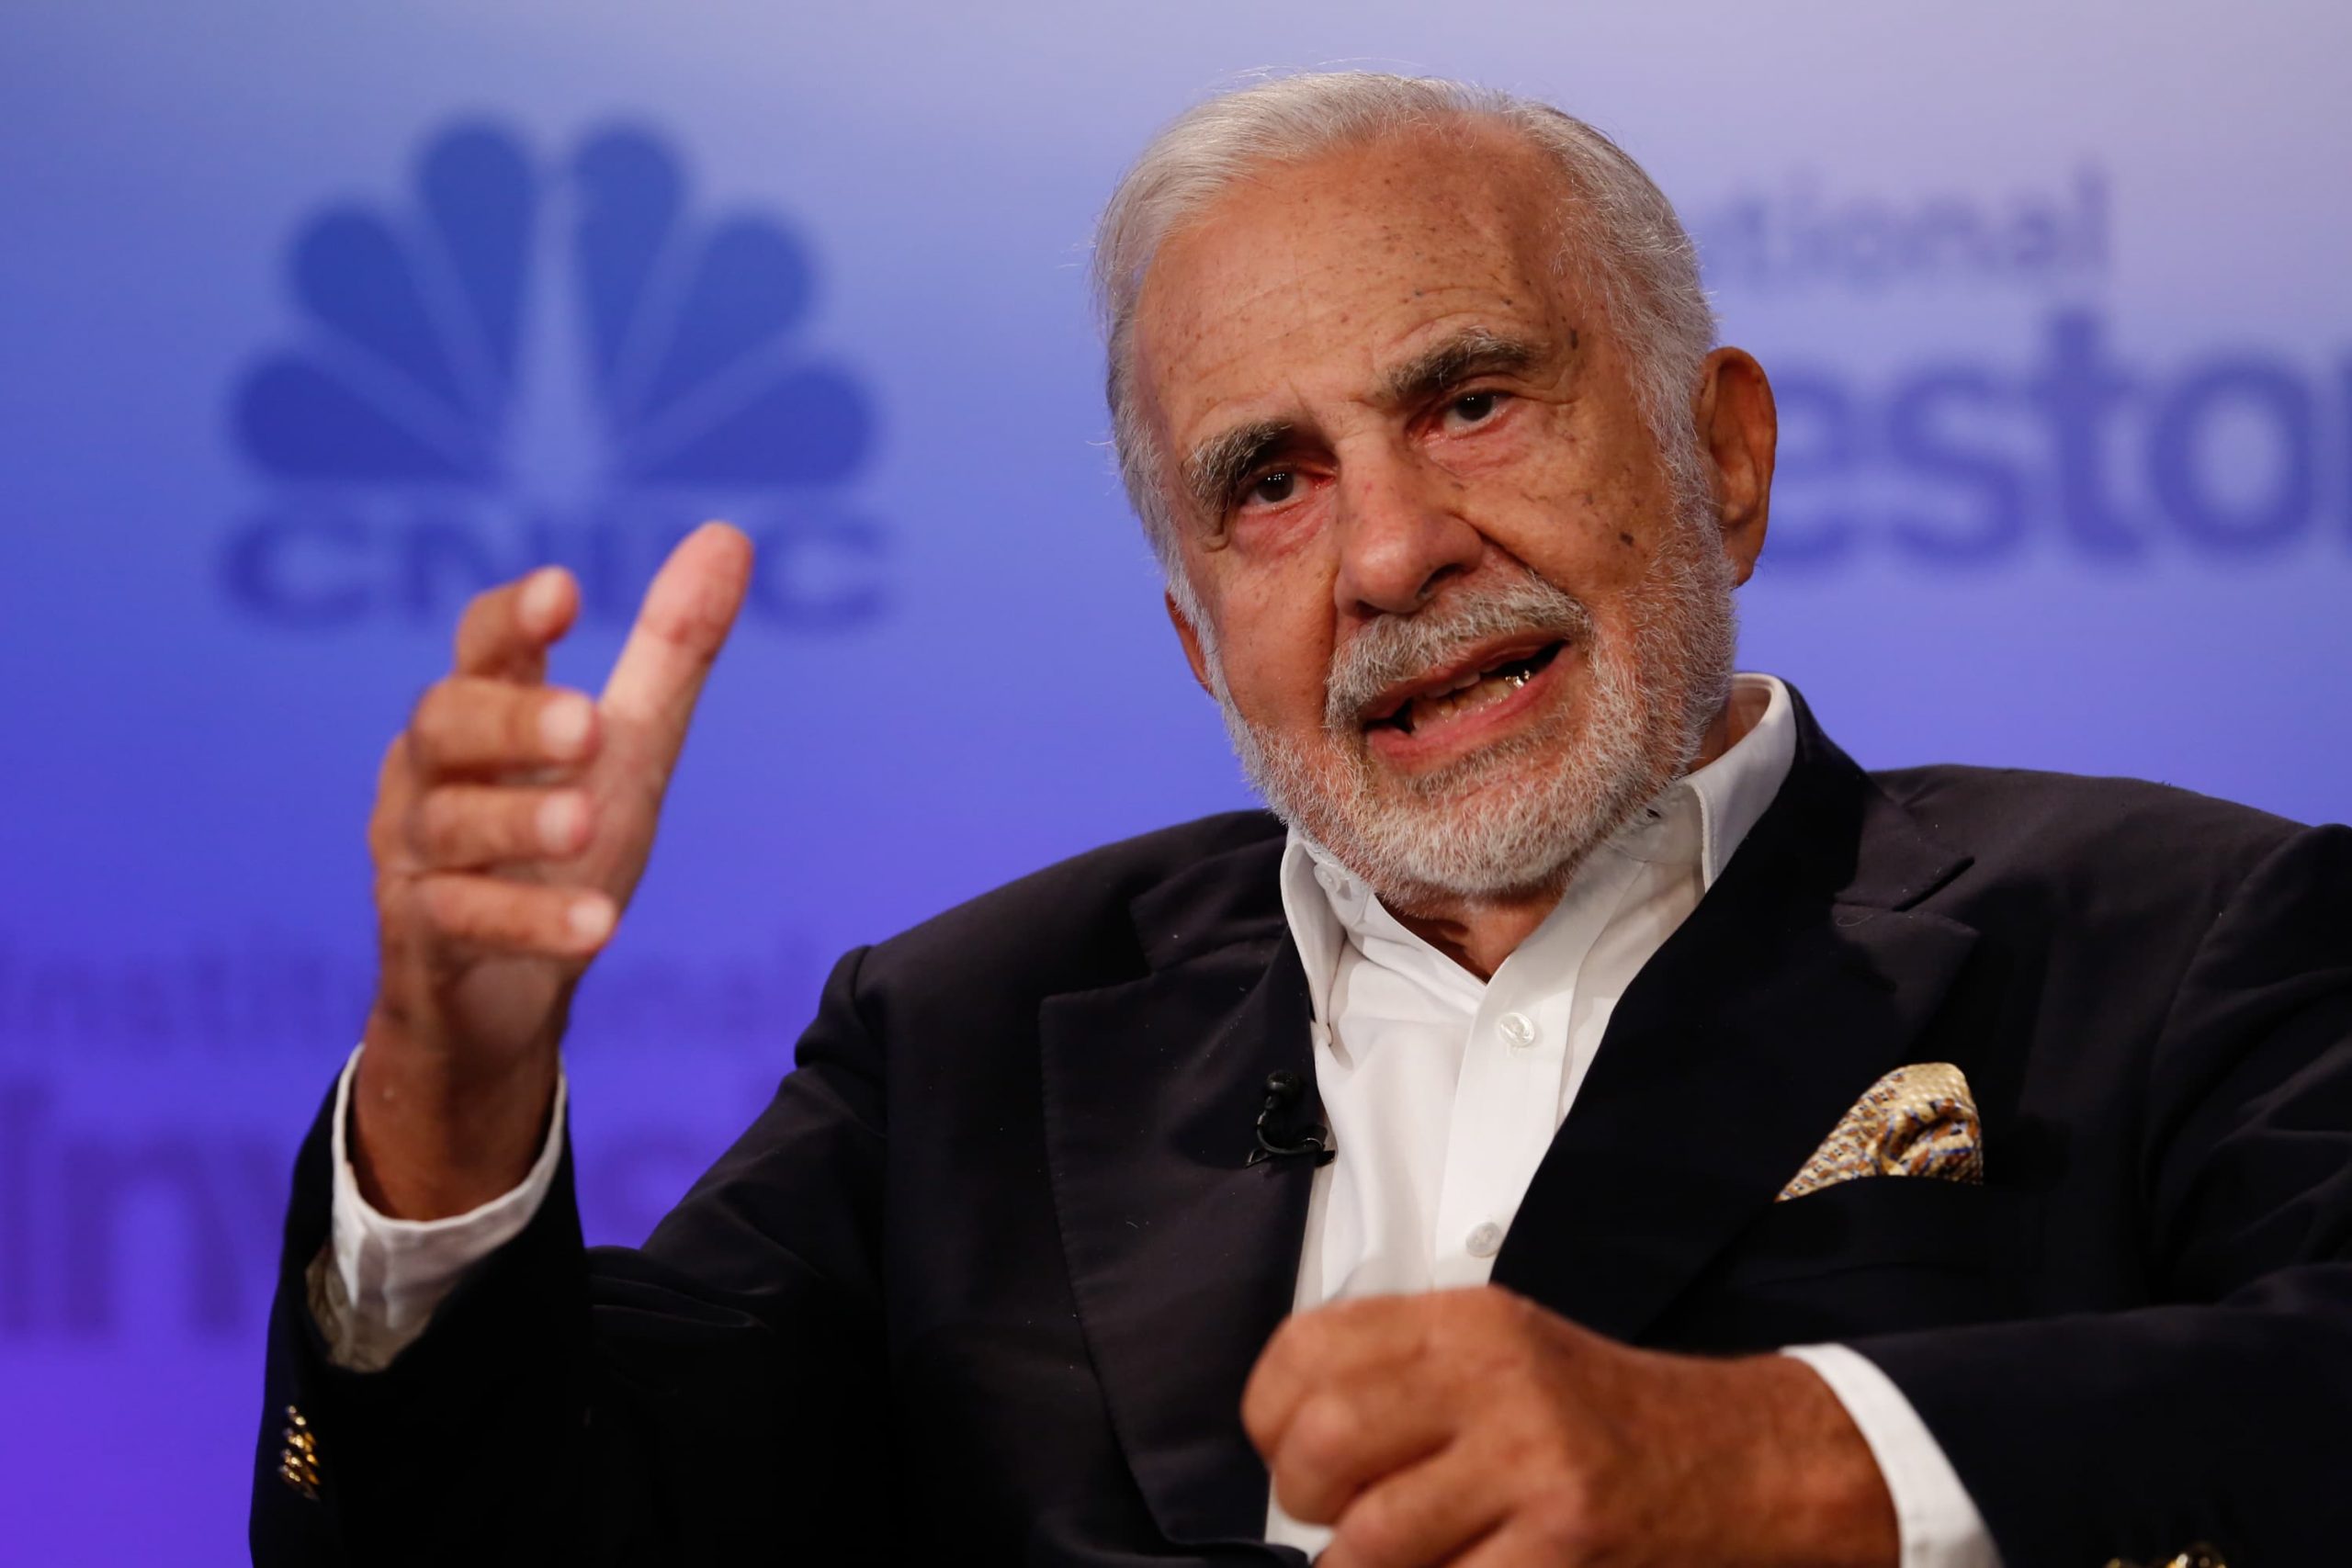 Carl Icahn warns that the market rally may finish in a painful correction and is hedging accordingly